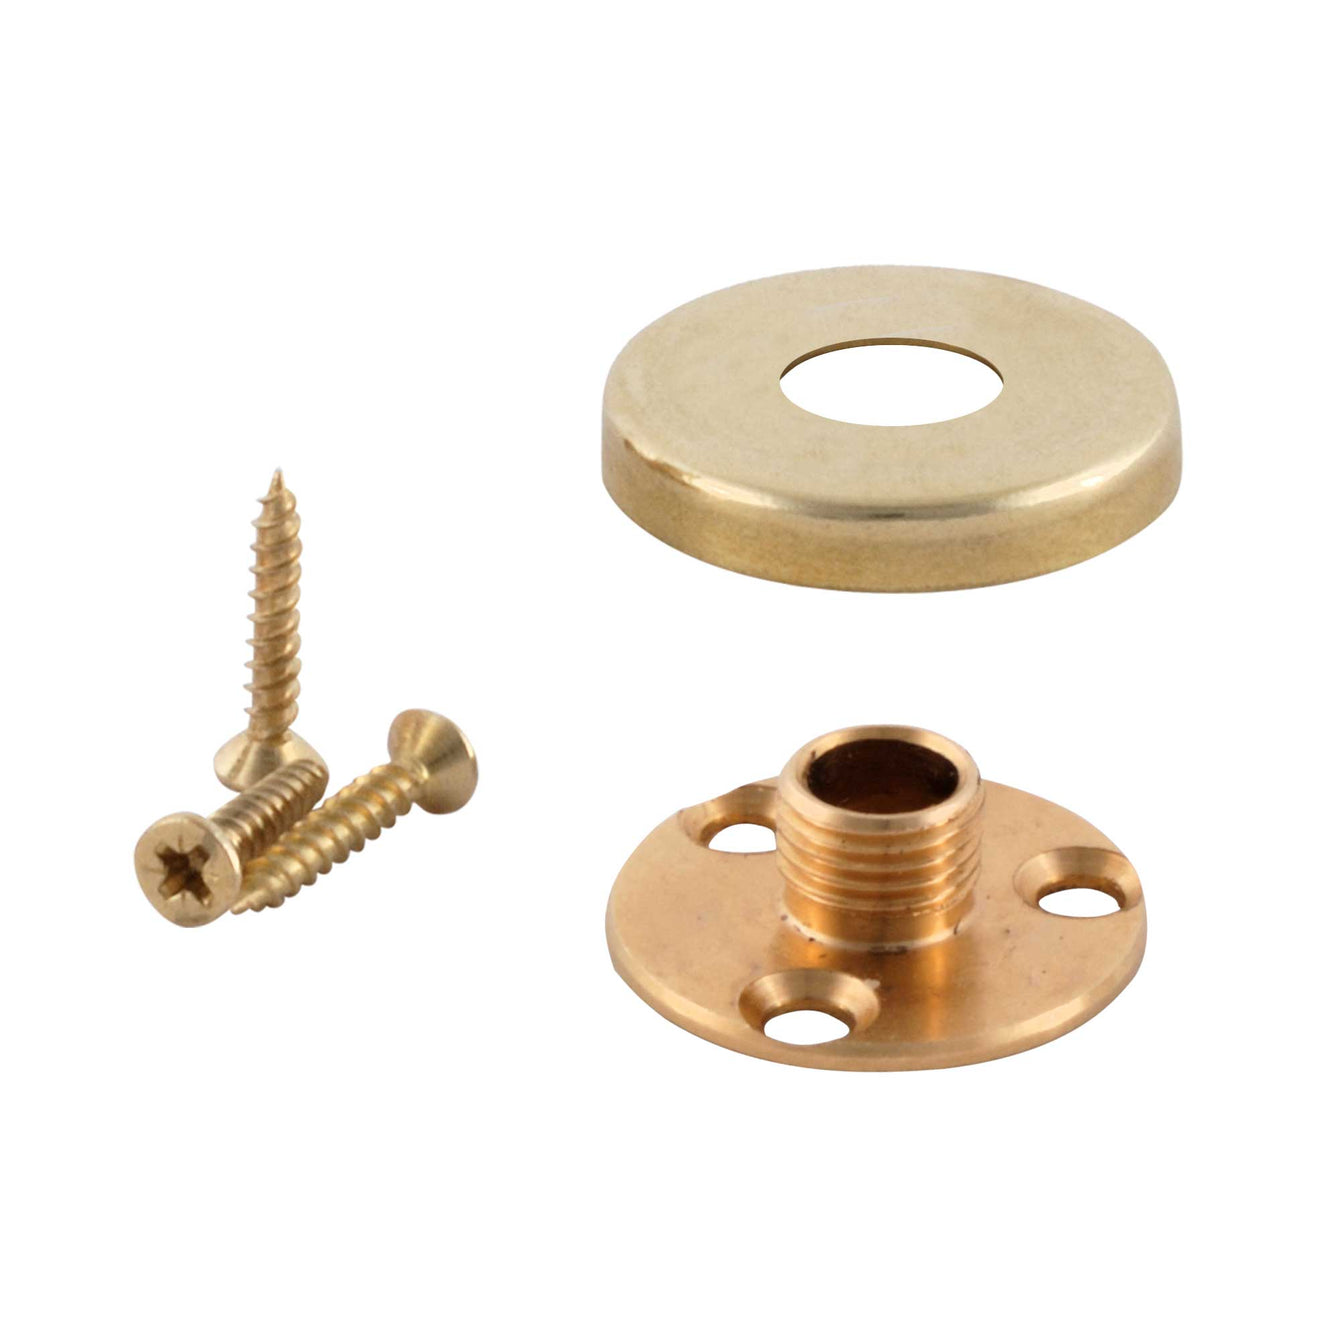 ElekTek Male Thread Back Plate Mount Cover and Screws - For use with B22 E27 Lamp holders Brass / Half Inch